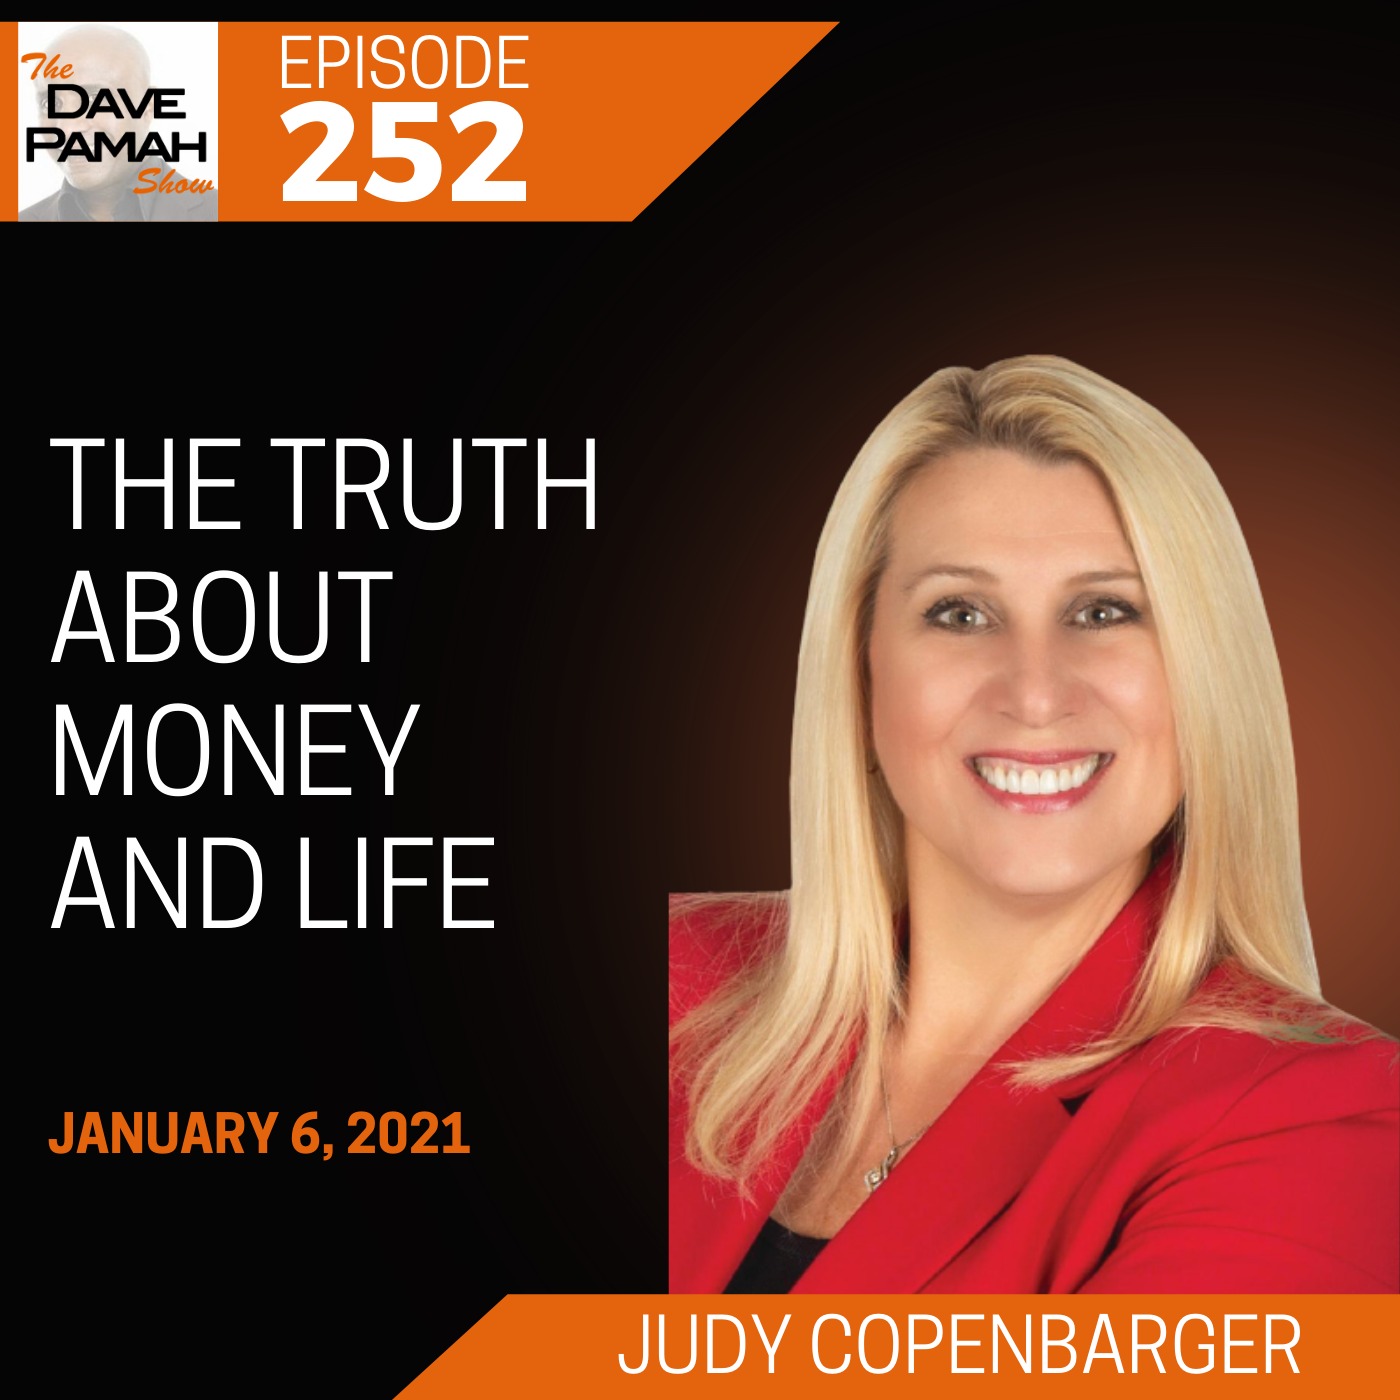 The truth about money and life with Judy Copenbarger